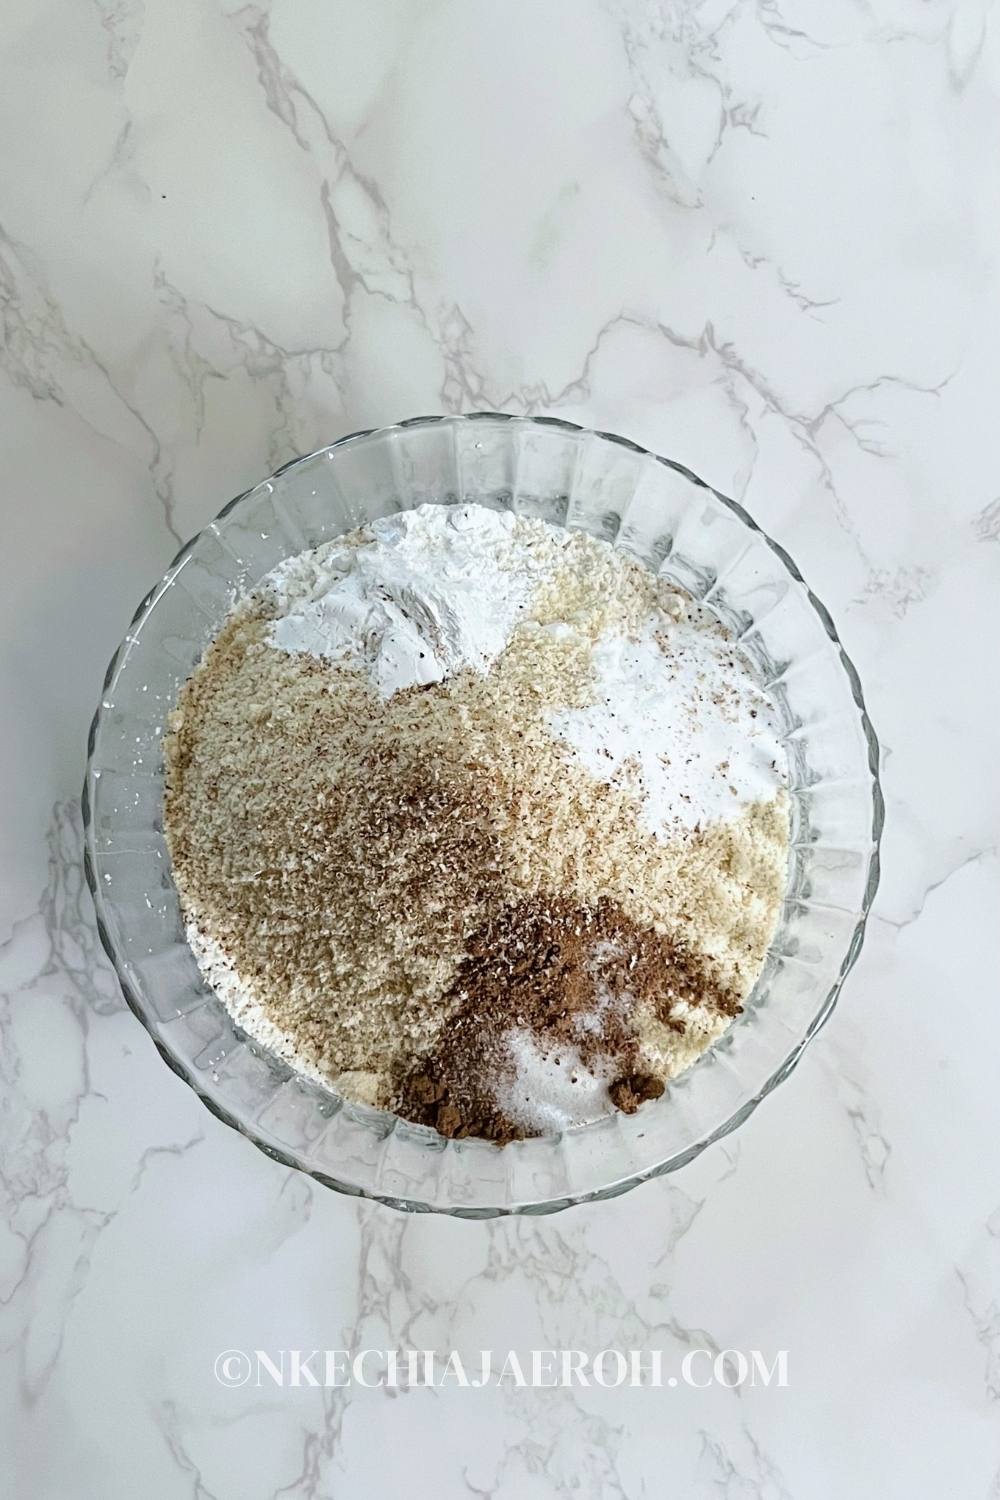 Add all the dry ingredients (all-purpose flour, almond flour, baking powder, baking soda, pumpkin spice, salt, cinnamon, and freshly grated nutmeg) into a bowl. Then, use a fork, mix, and set aside.